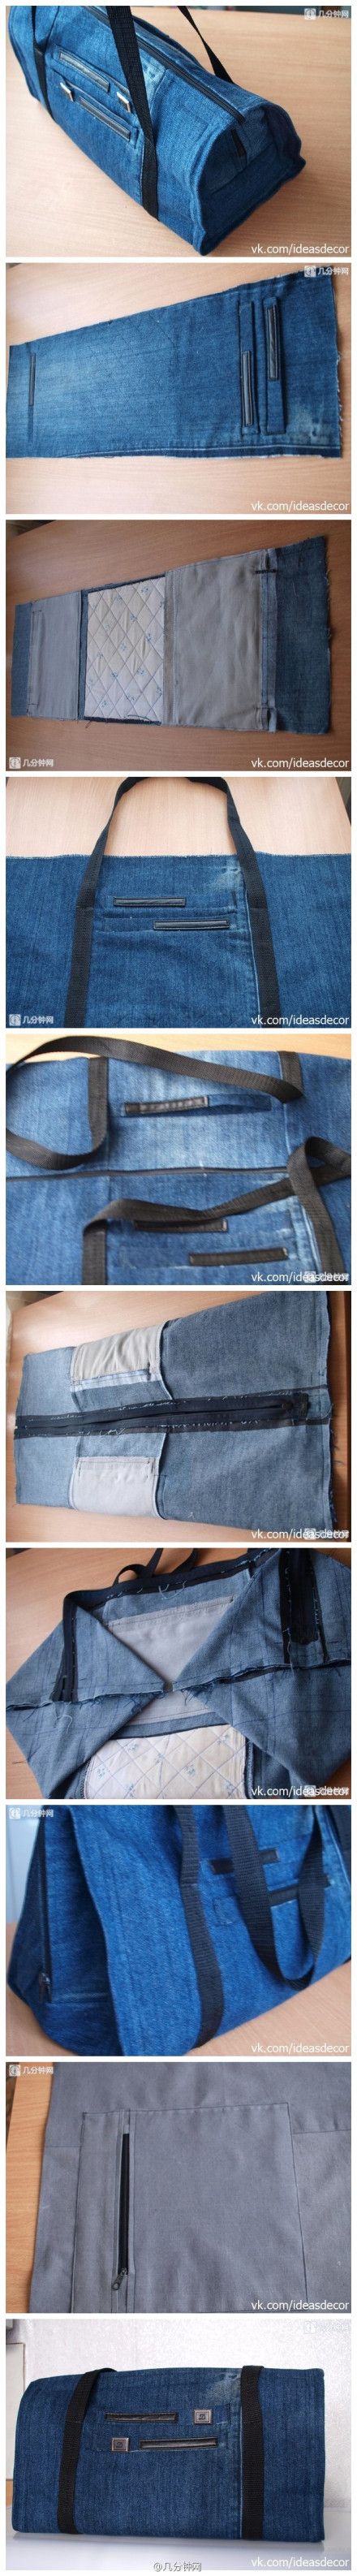 Bags from Denim